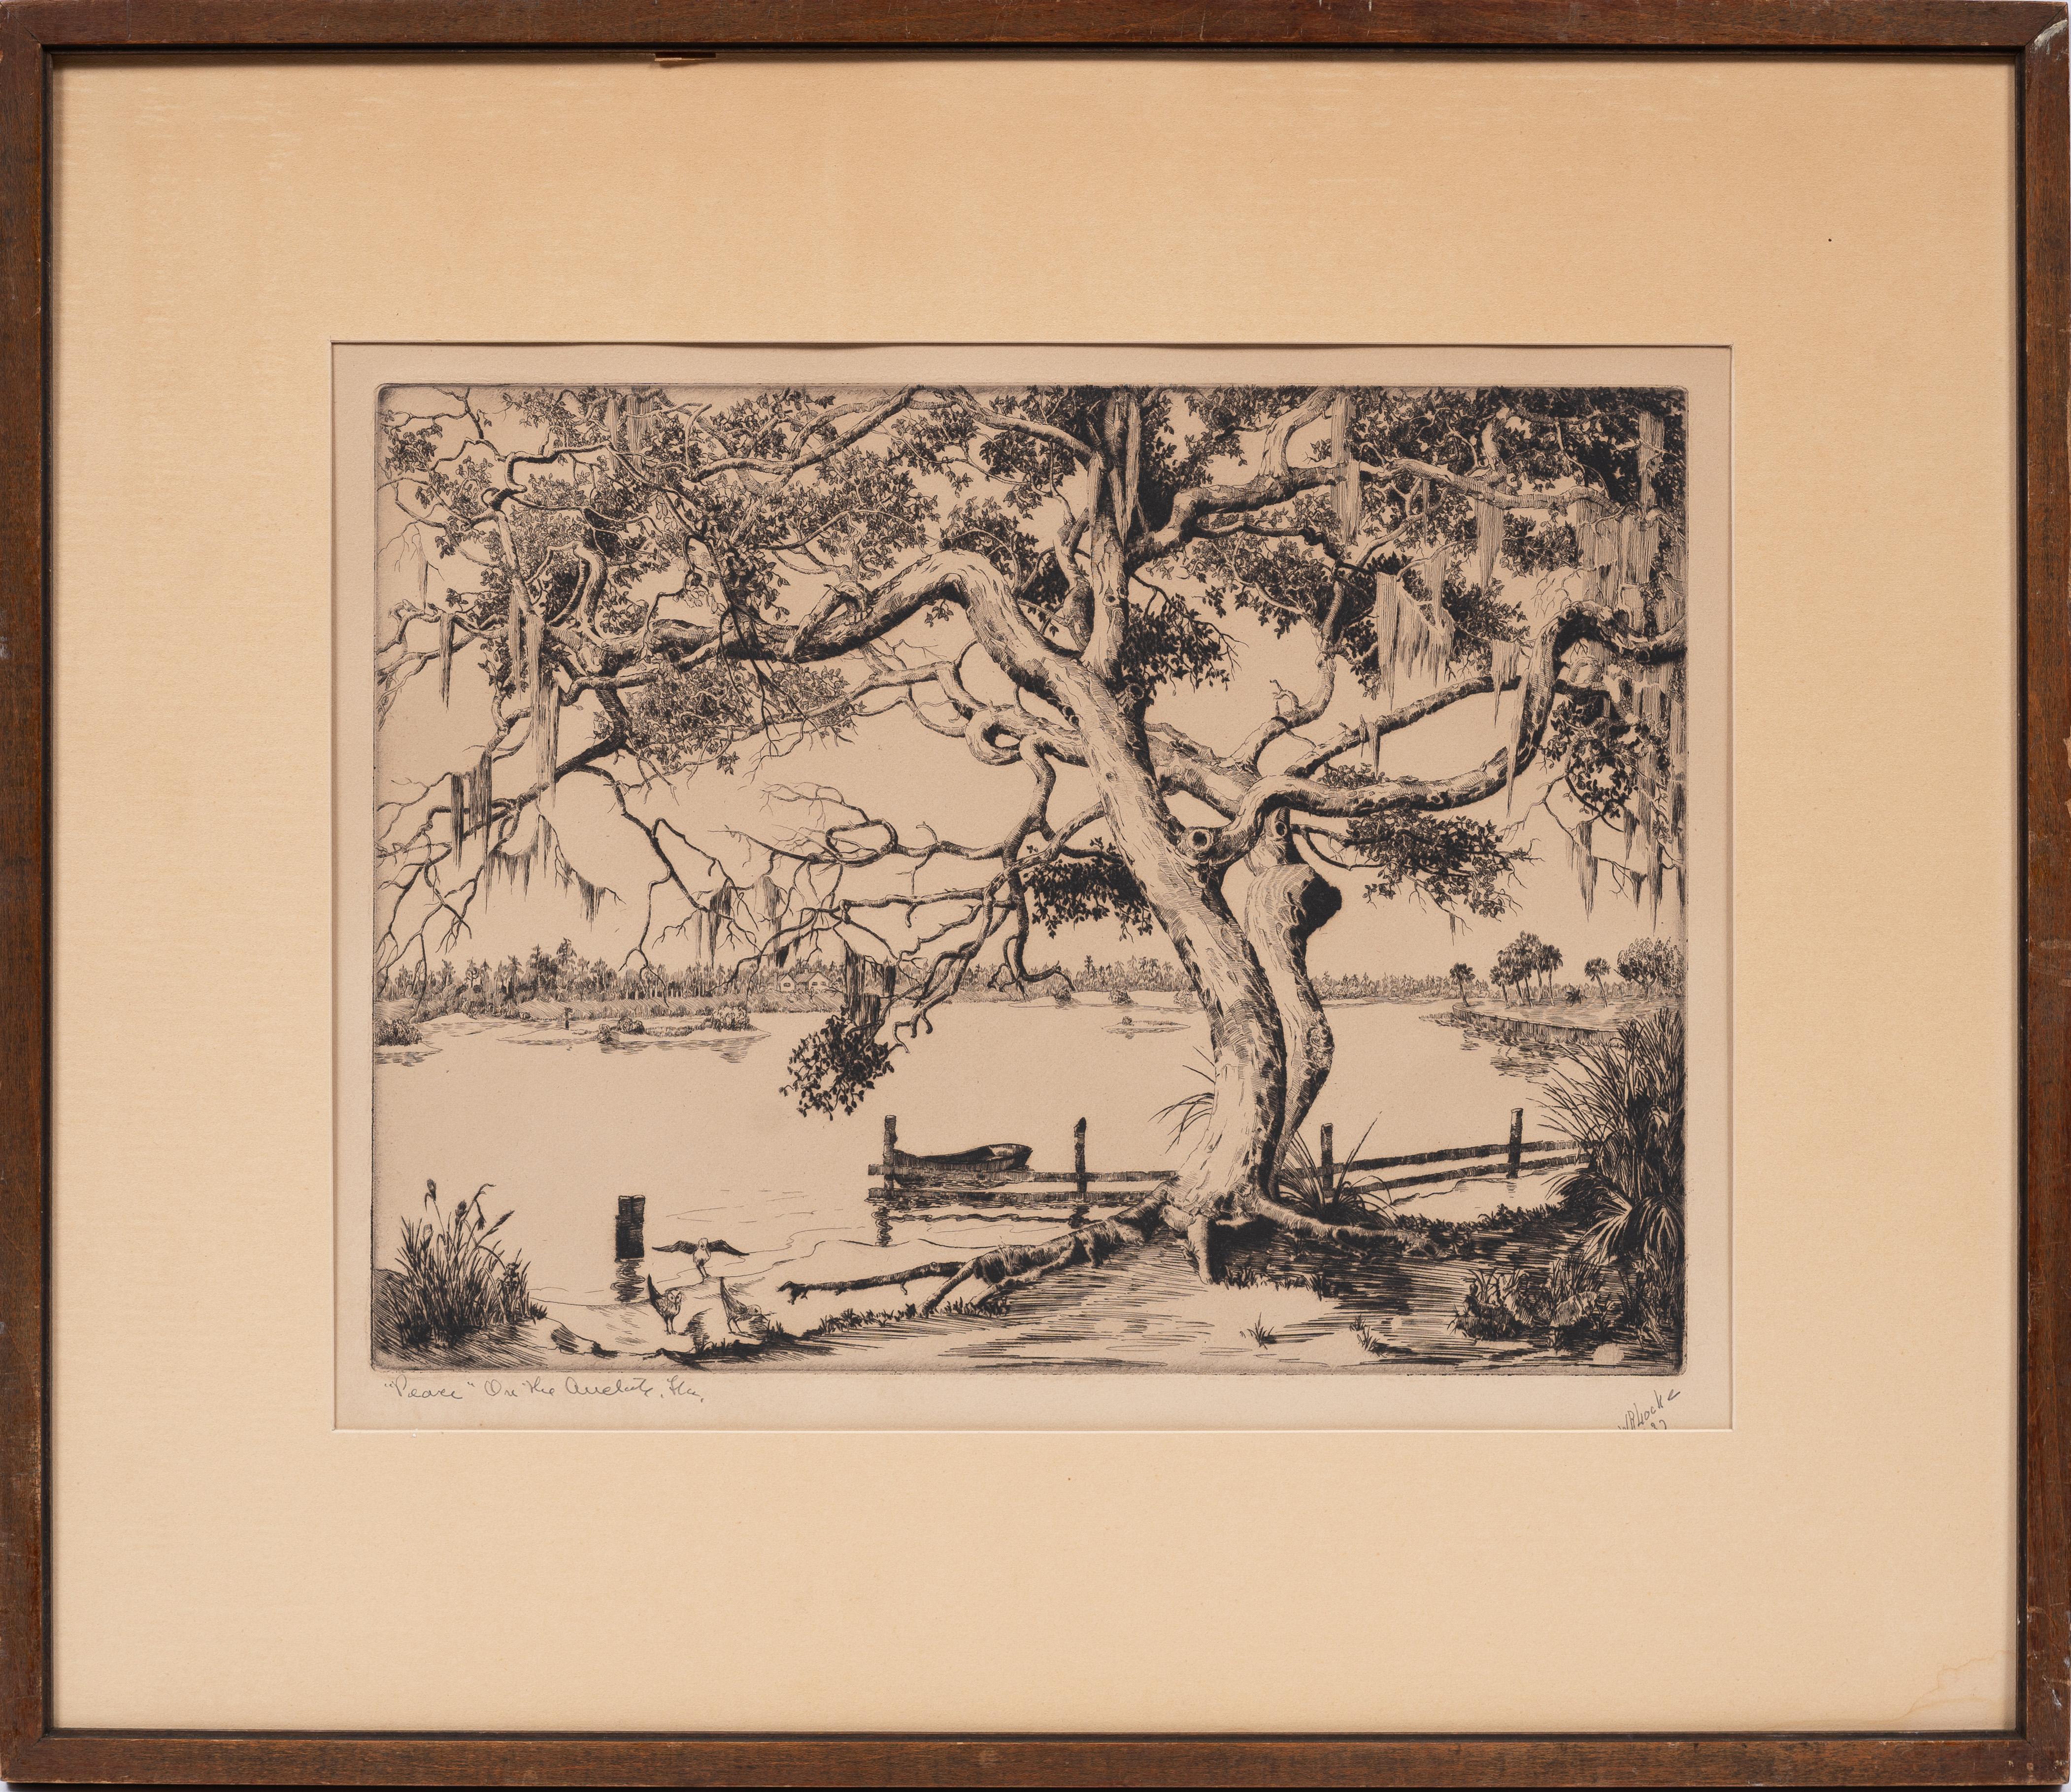 walter ronald locke Landscape Painting - Antique American Old Florida Southern School Landscape Signed Etching